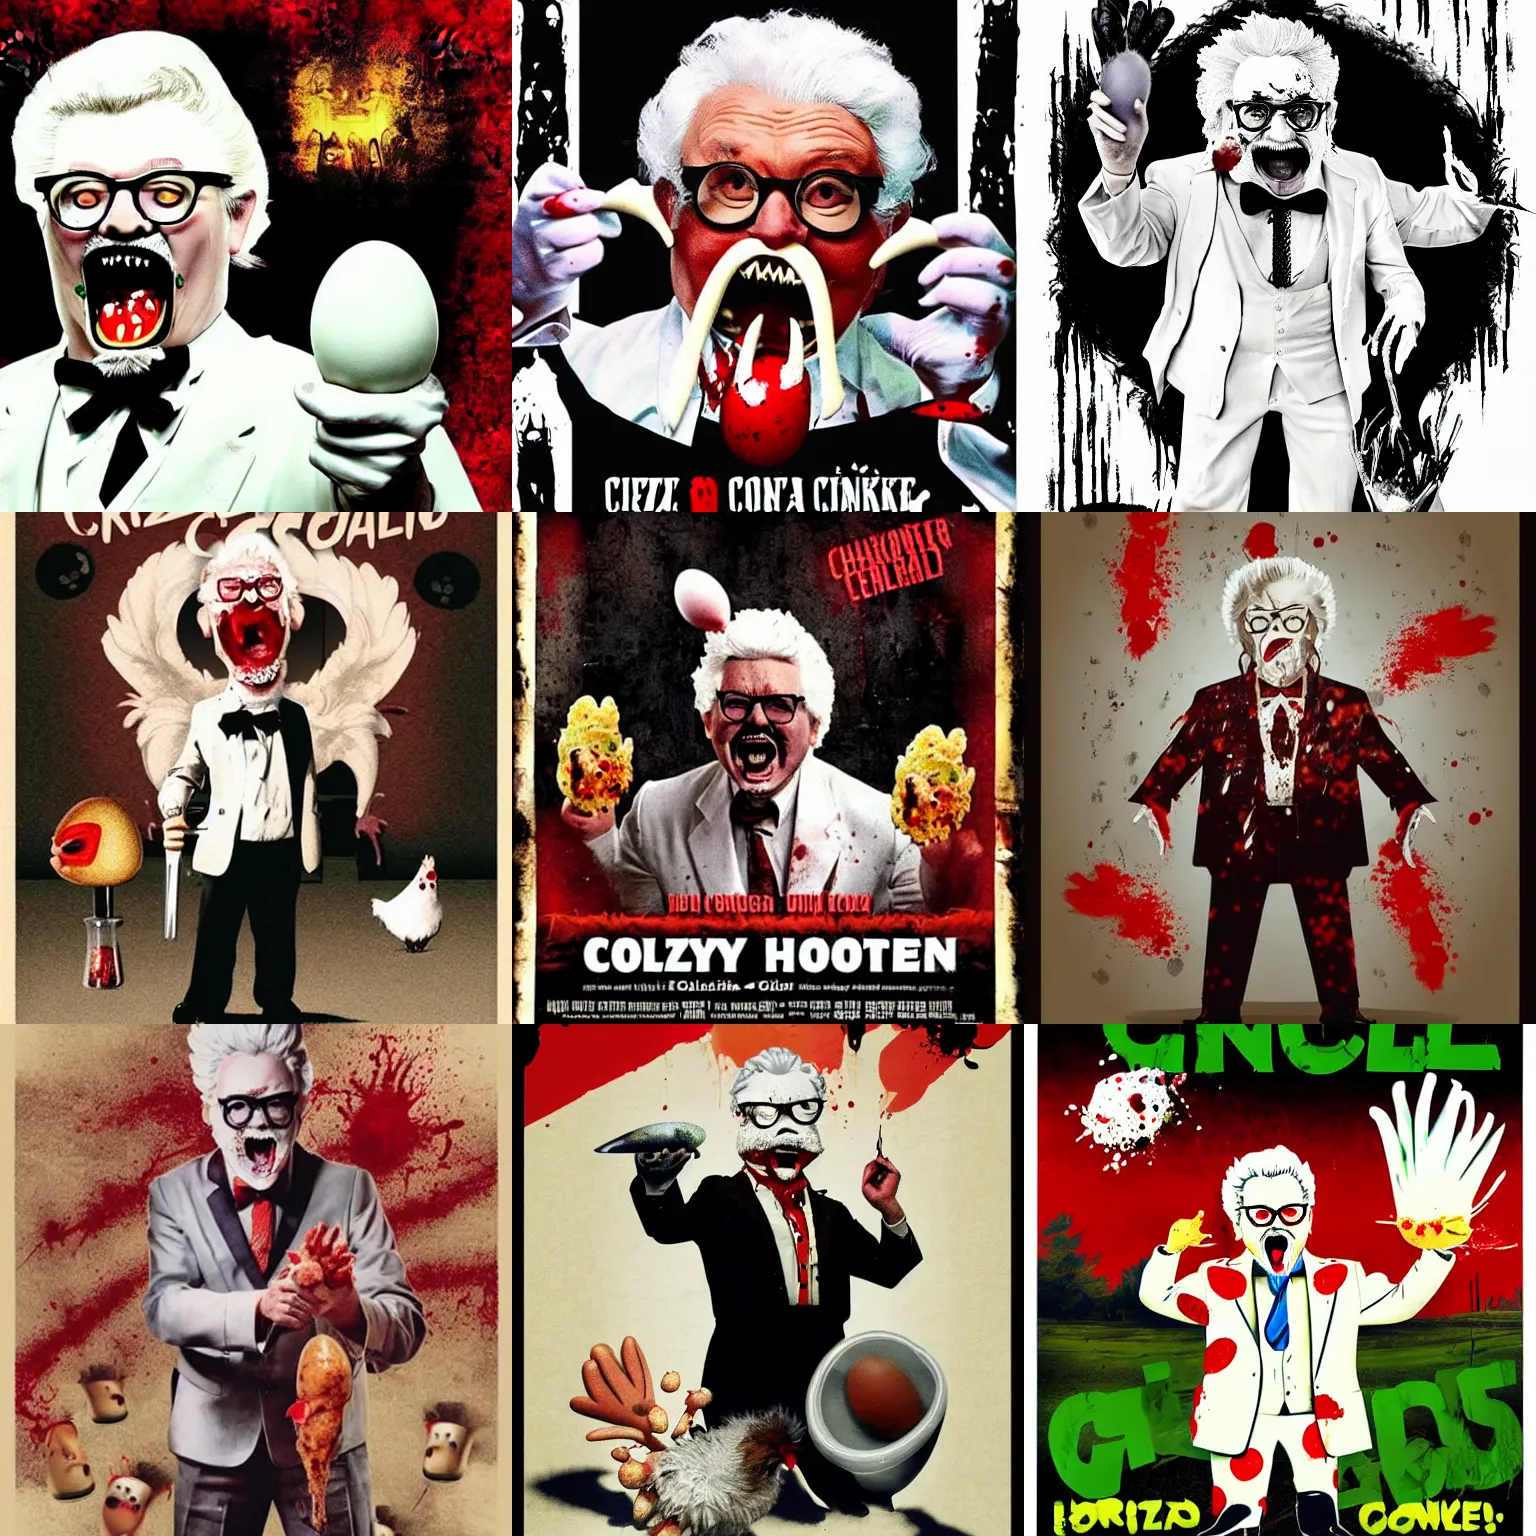 Prompt: horror film poster. crazy colonel sanders with sharp teeth. holding a chicken egg. blood splatter background realistic.